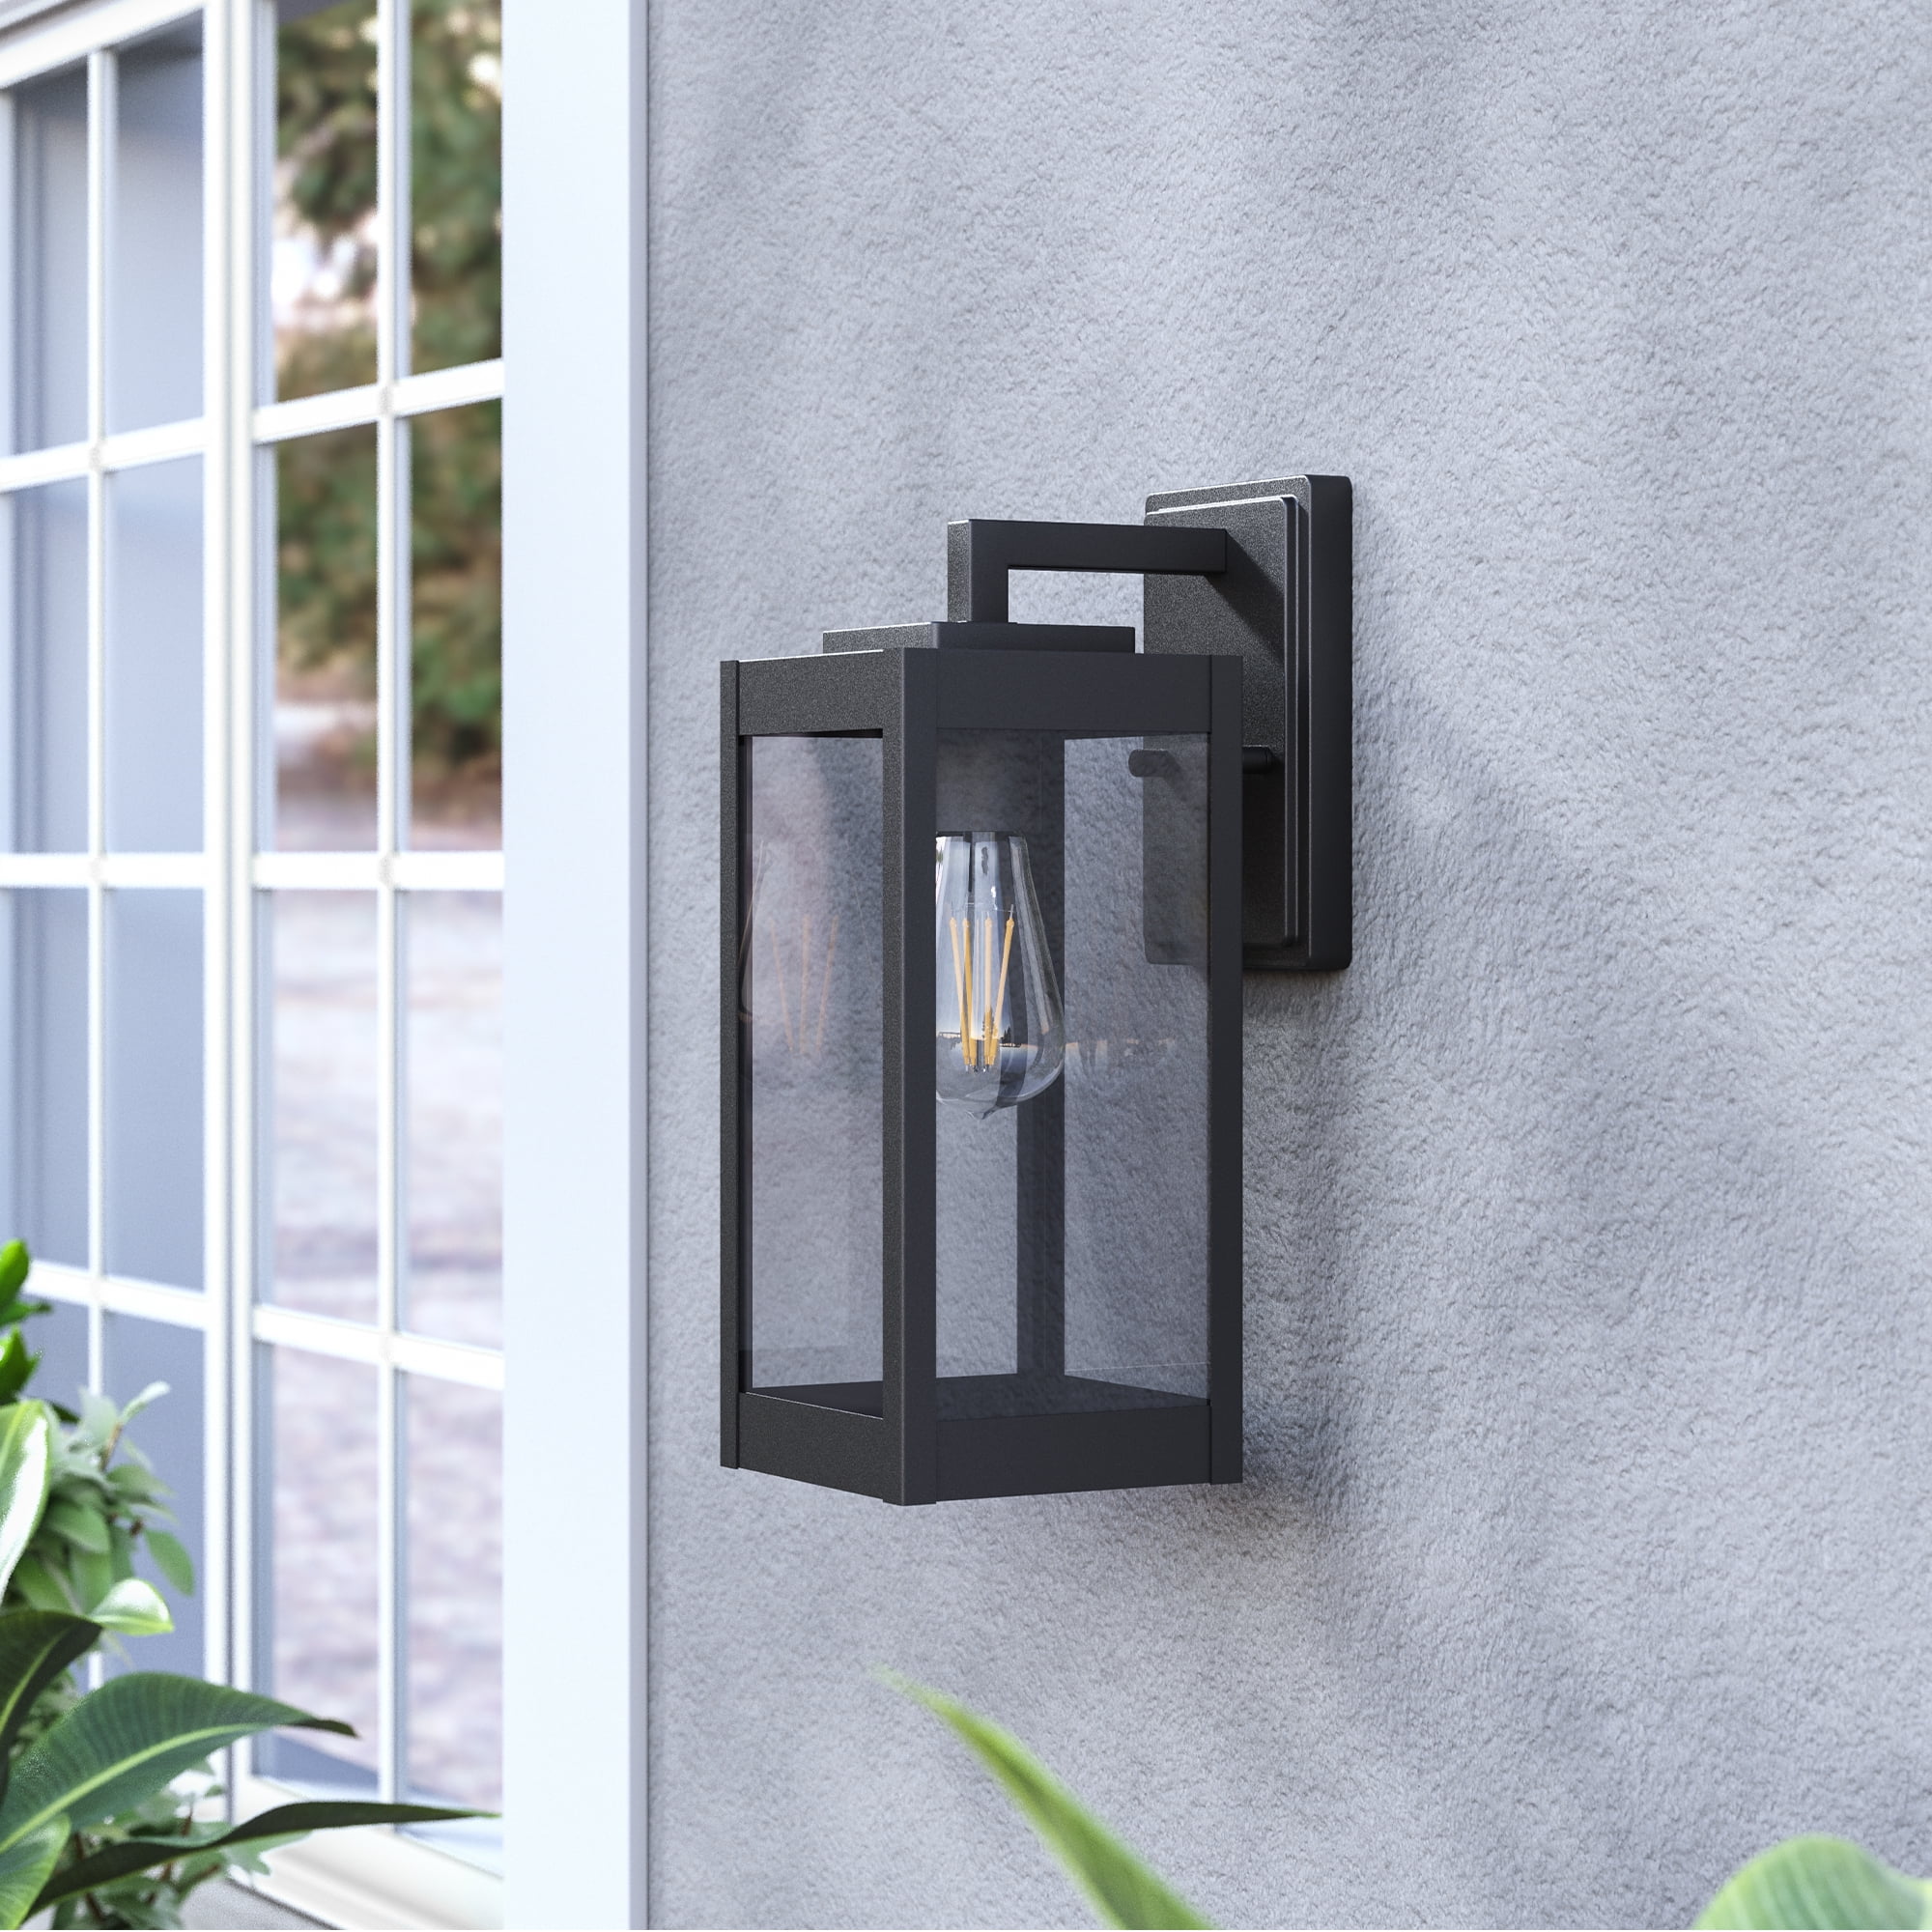 DEWENWILS Outdoor Wall Lights Fixture Modern Porch Light Wall Lantern with  Clear Glass Shade Matte Black Weatherproof sconce E26 Base